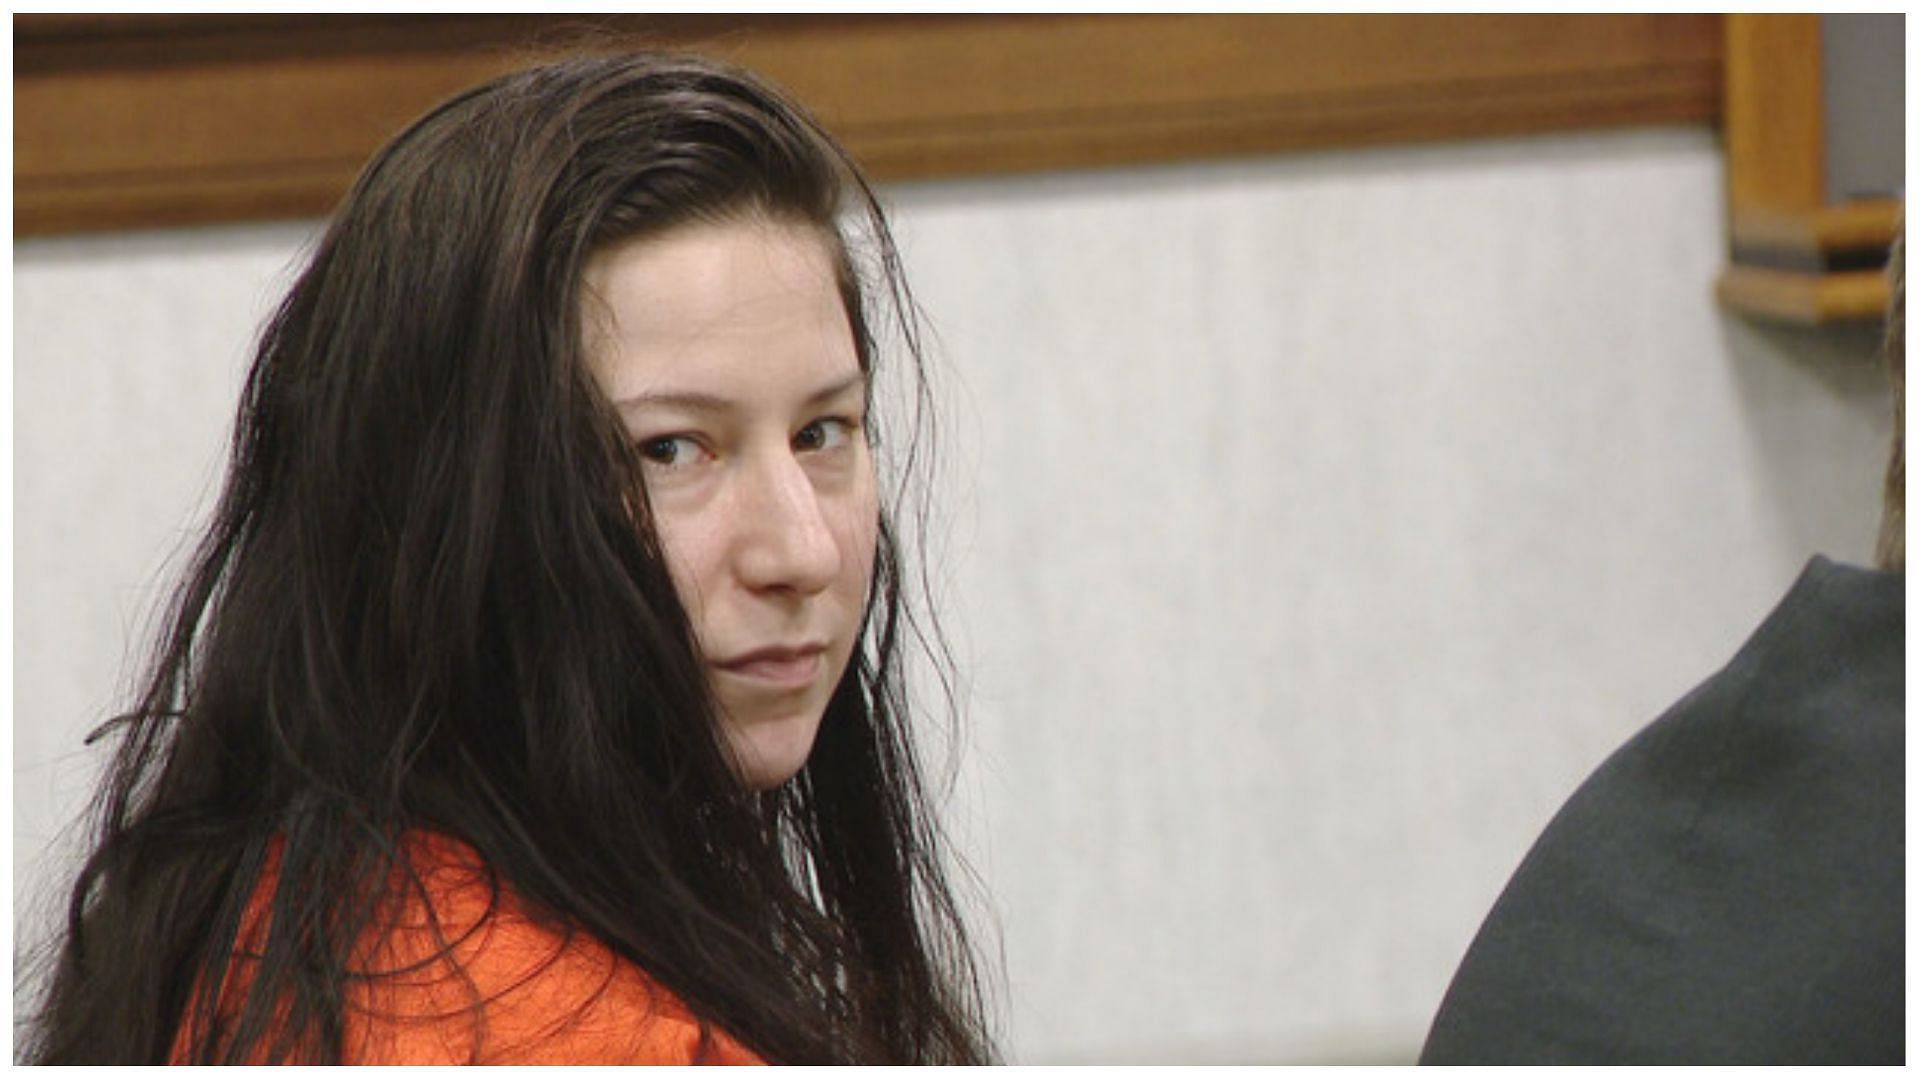 The suspect was reportedly angered that her trial had been postponed (image via WLUK/David Duchan)